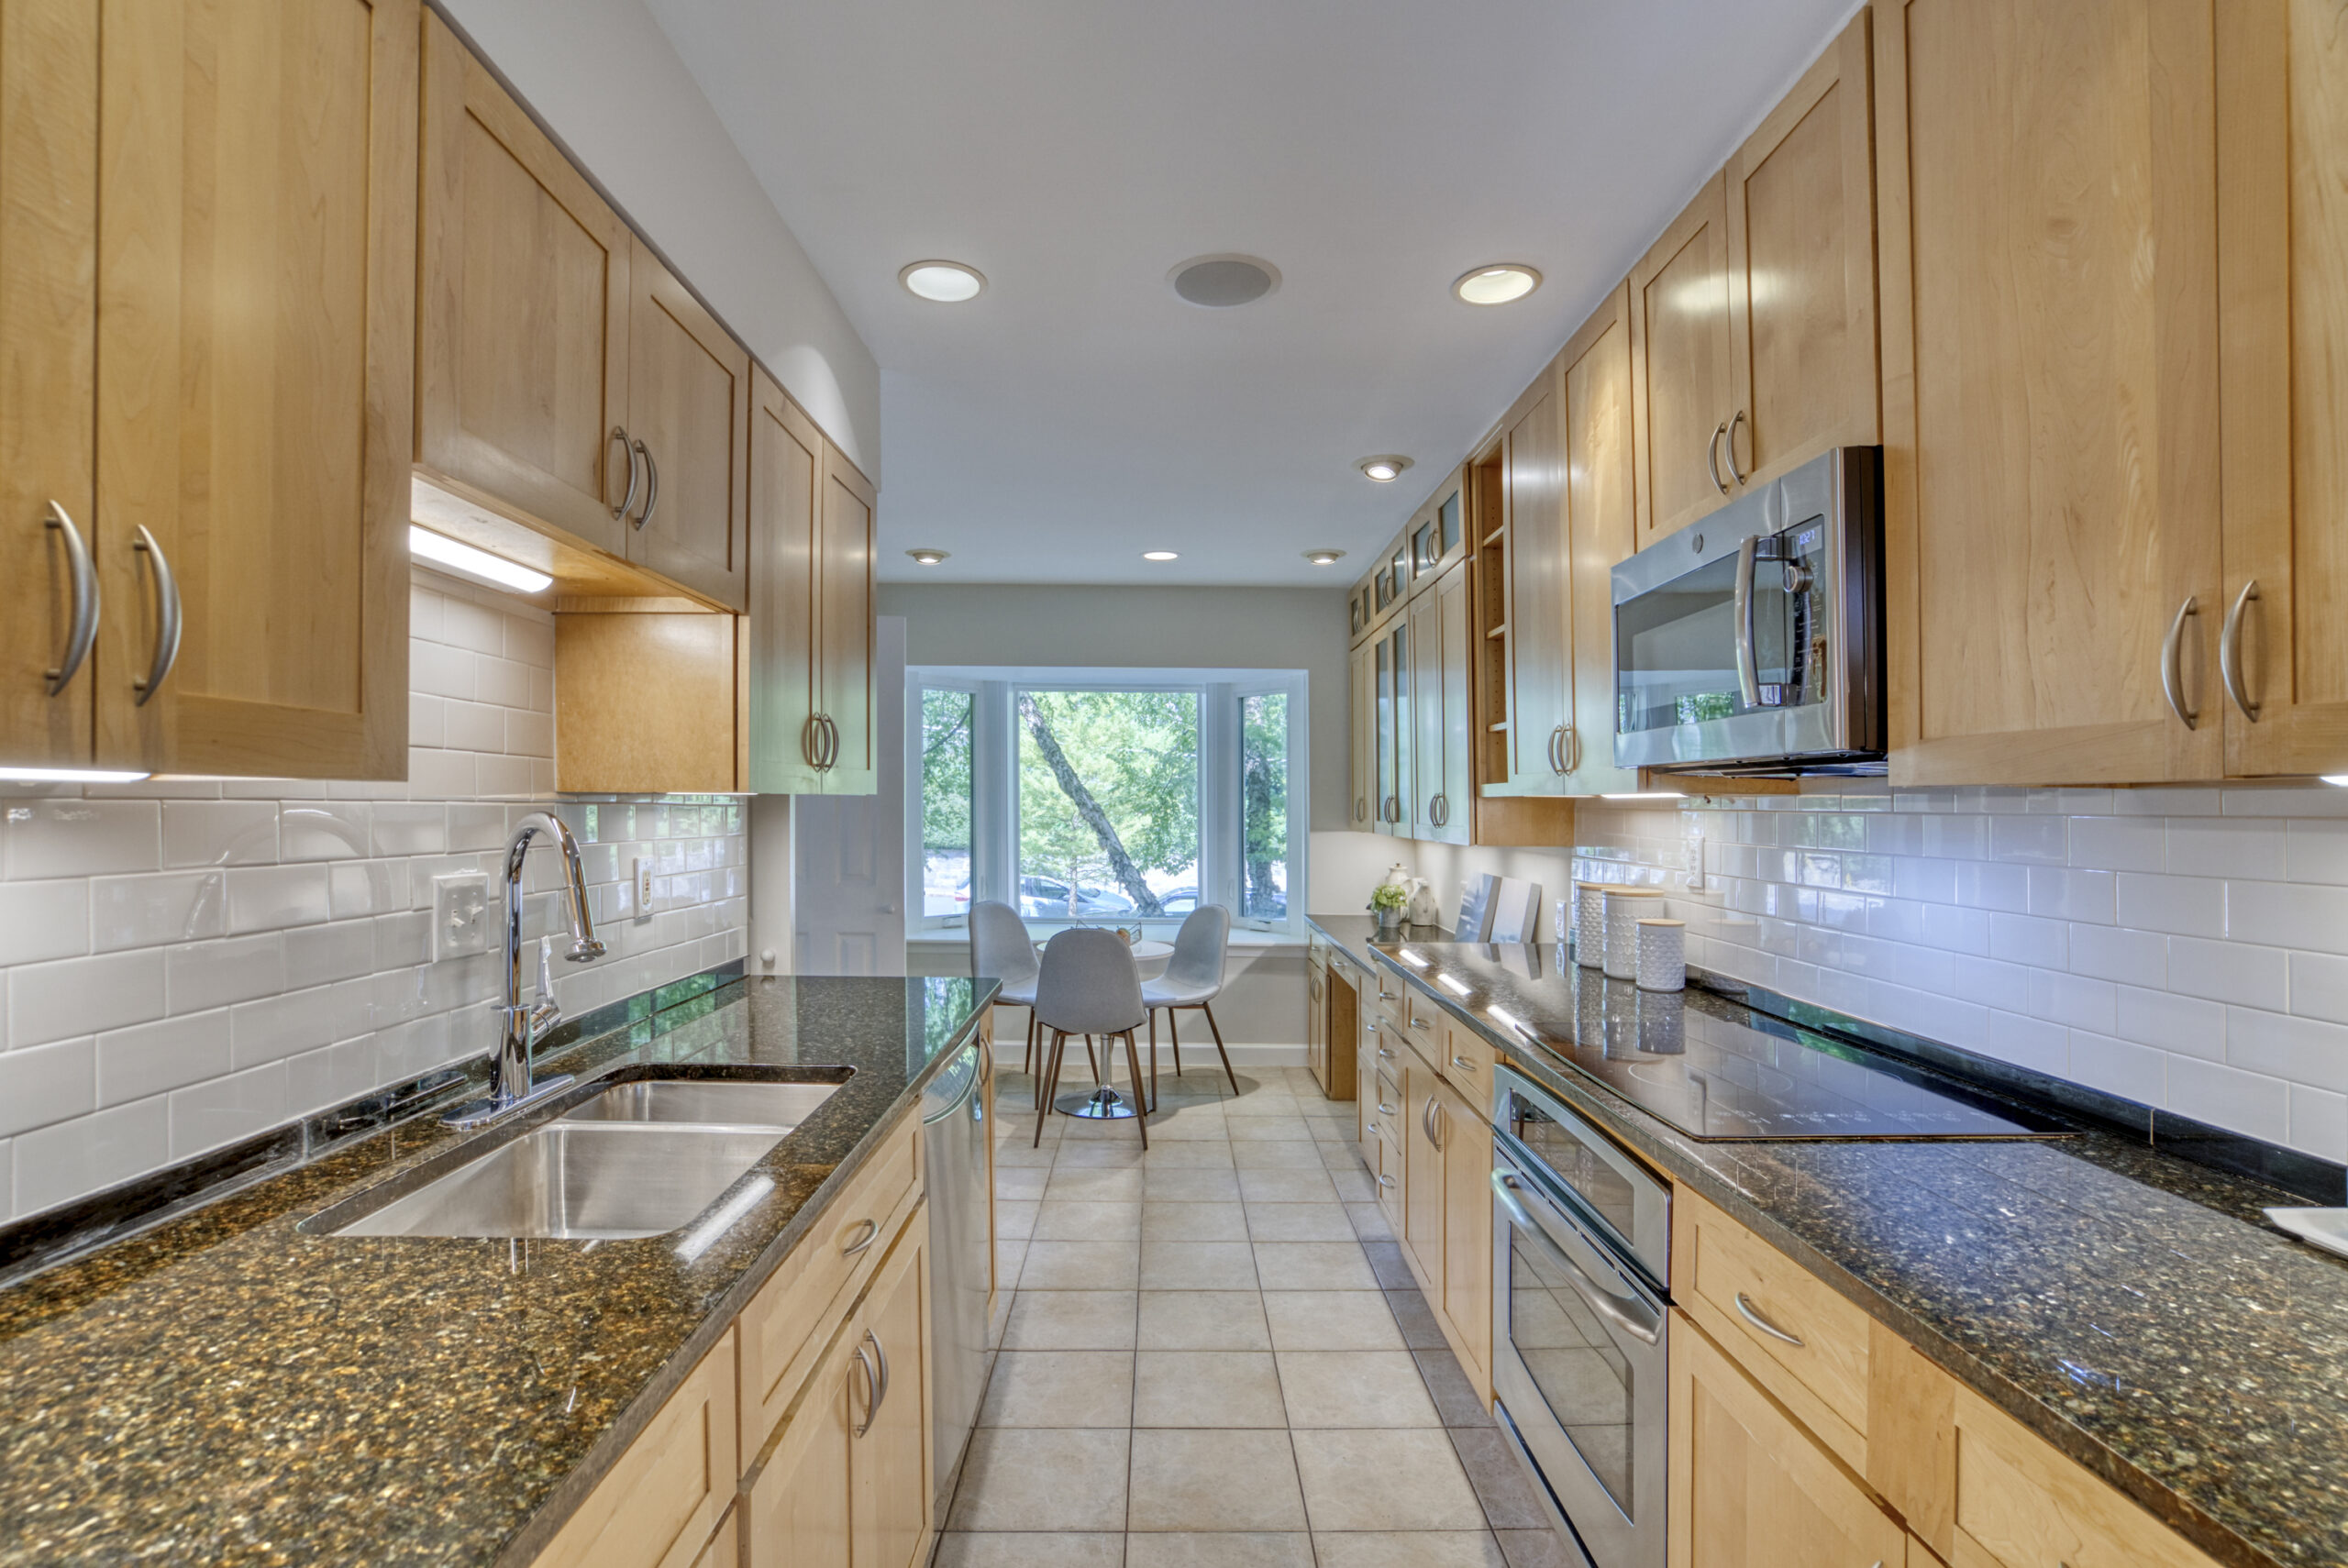 Professional interior photo of 1215 N Nash St #1, Arlington - showing the galley kitchen looking from the back towards the front of the home with bay windows and kitchen table in the background